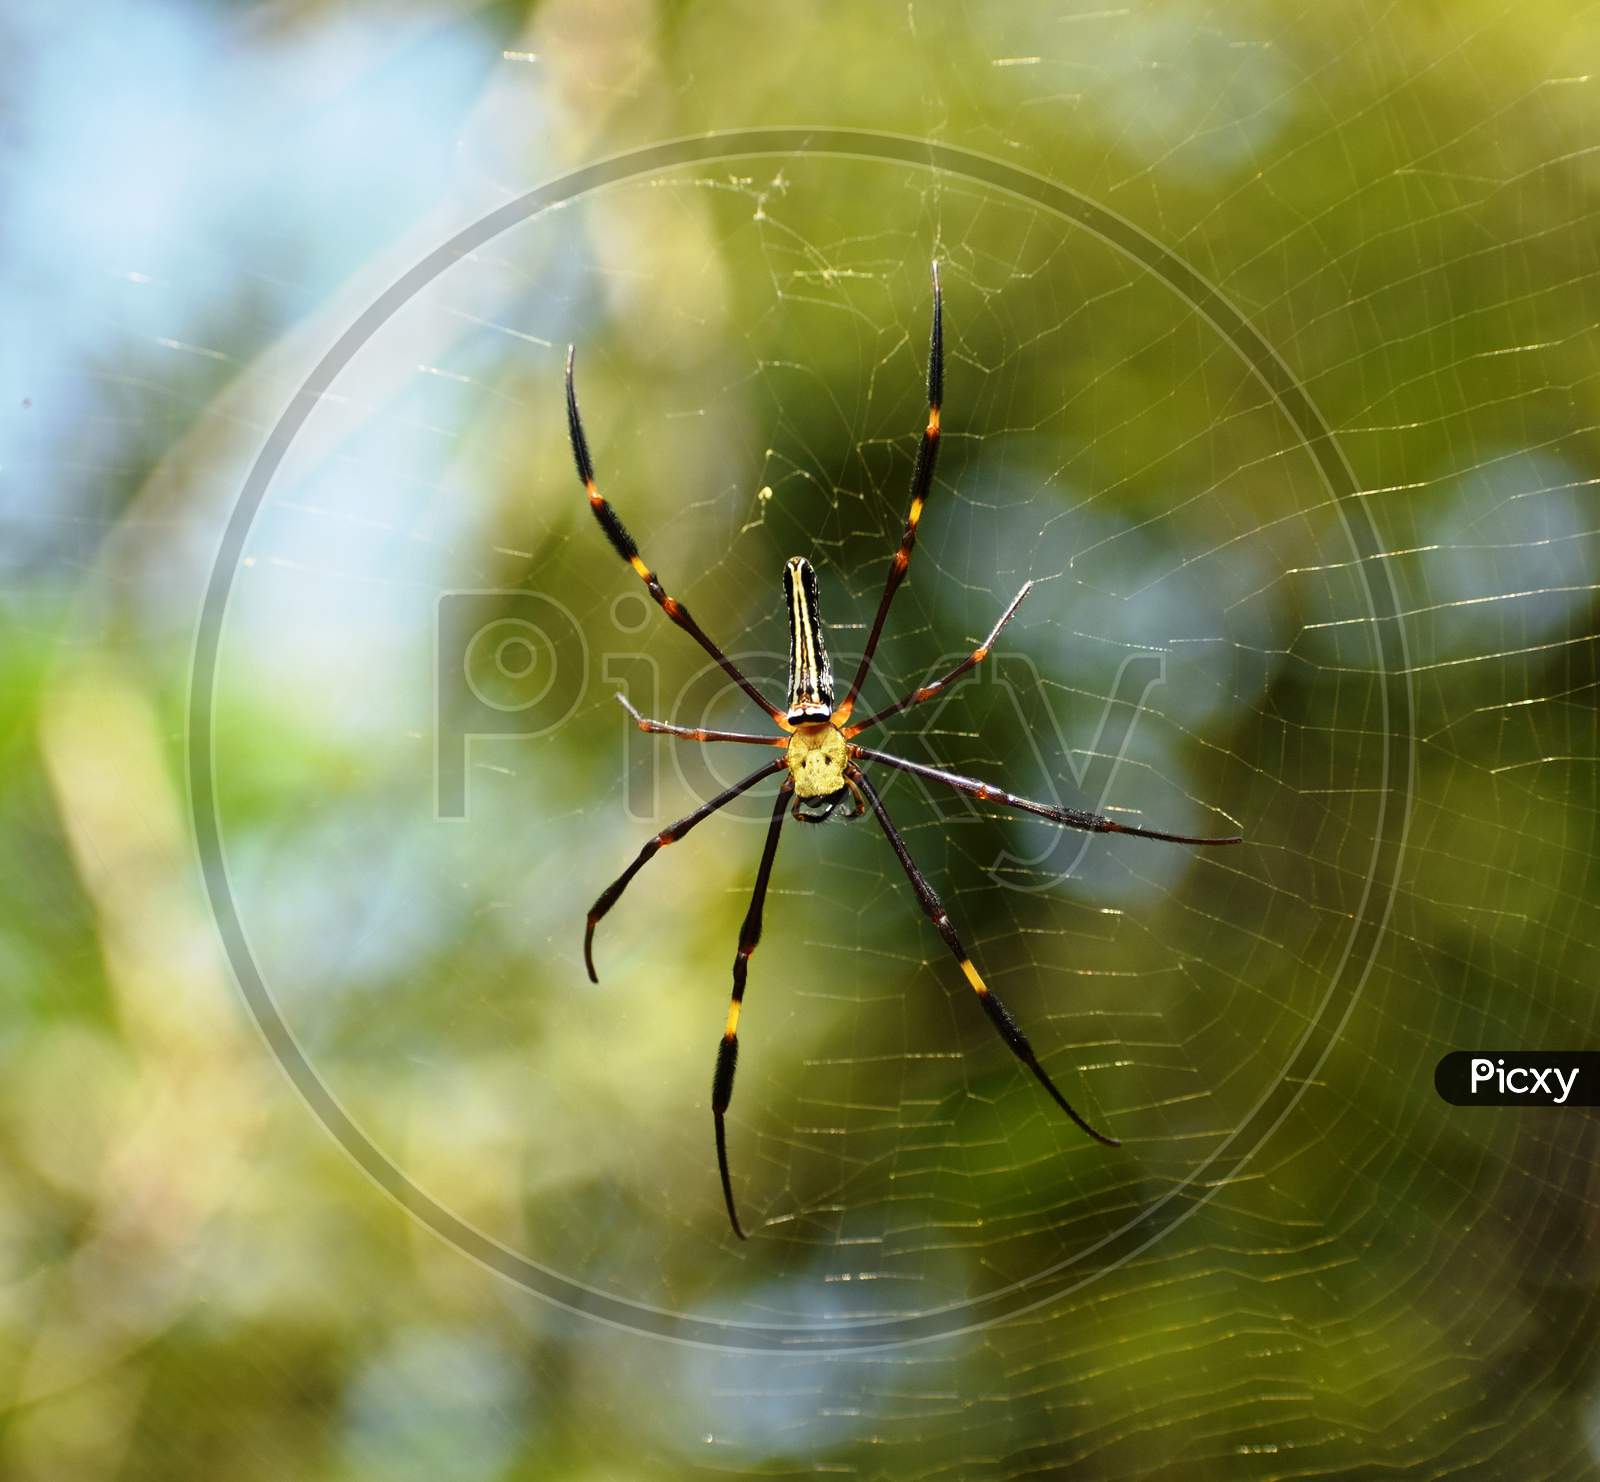 Golden silk orb-weaver or Nephila spider with the web. webs